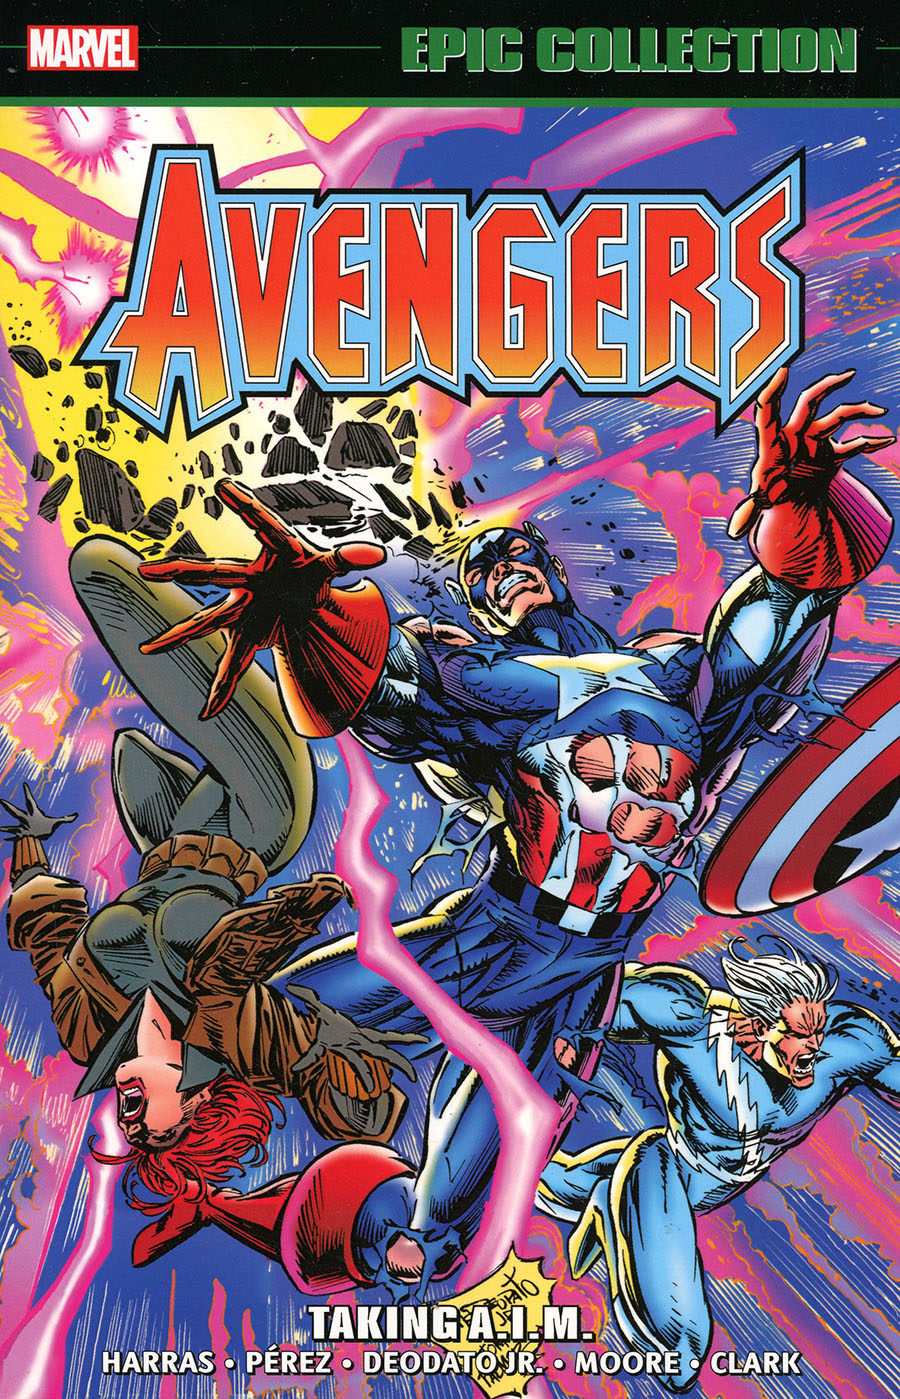 Avengers Epic Collection Vol 26 Taking A.I.M. TP